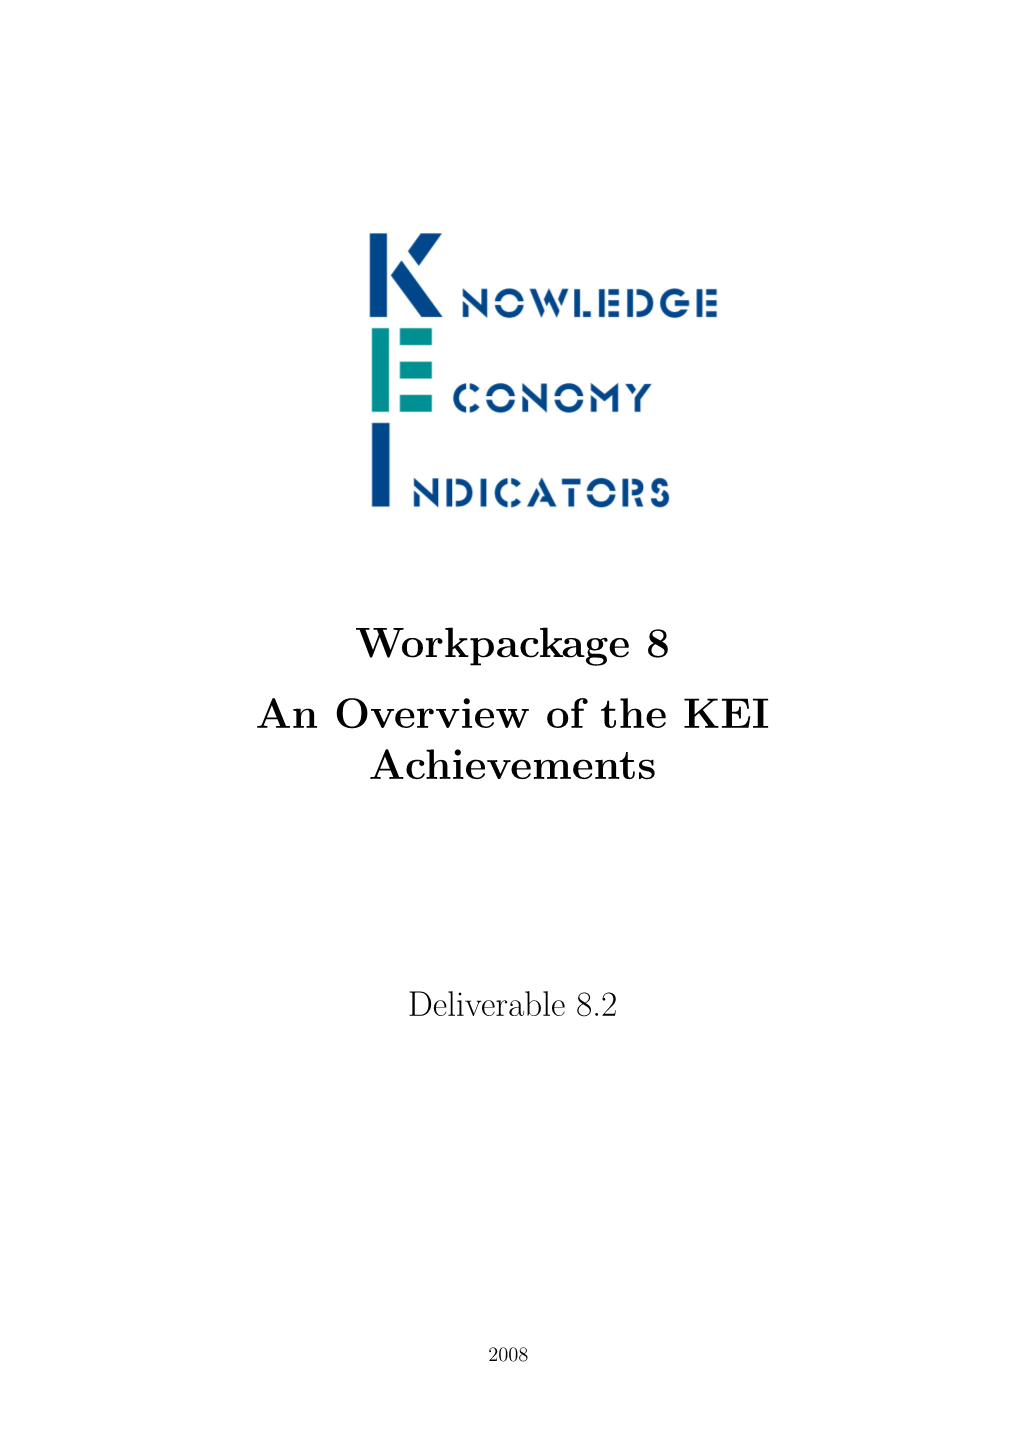 Workpackage 8 an Overview of the KEI Achievements